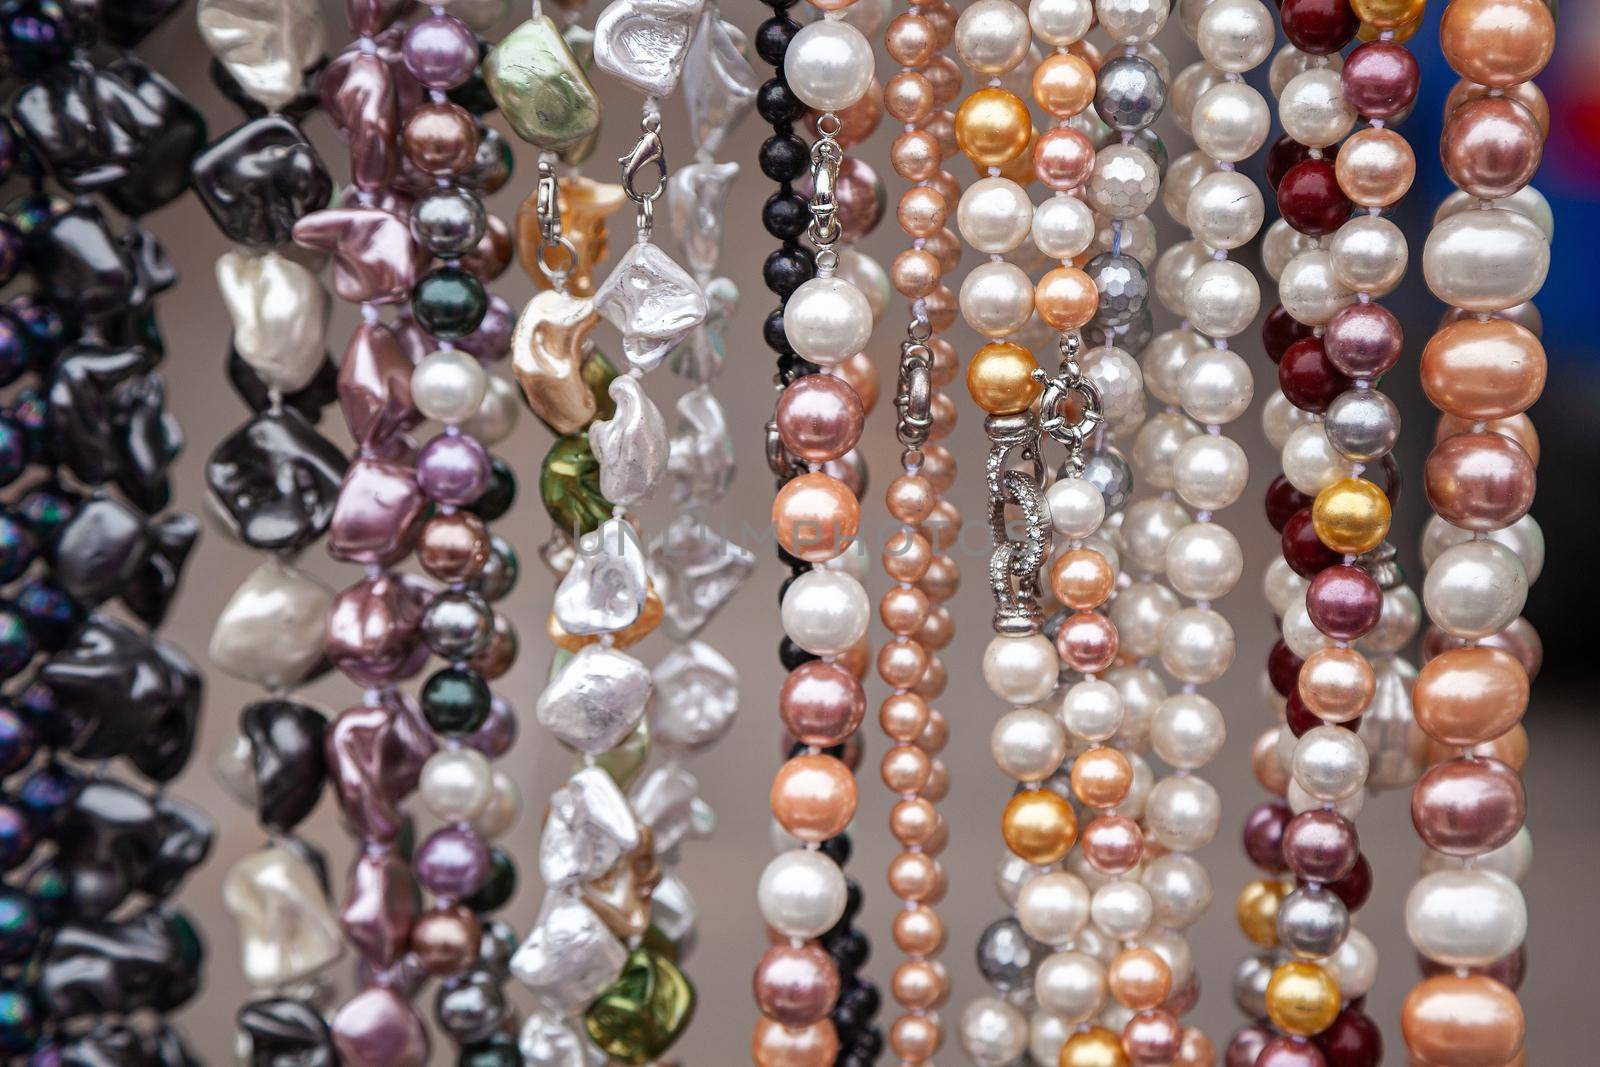 Various colorful beads in the market. Wallpaper background of a colorful necklace made of precious stones and colored beads. Semi-precious jewelry.